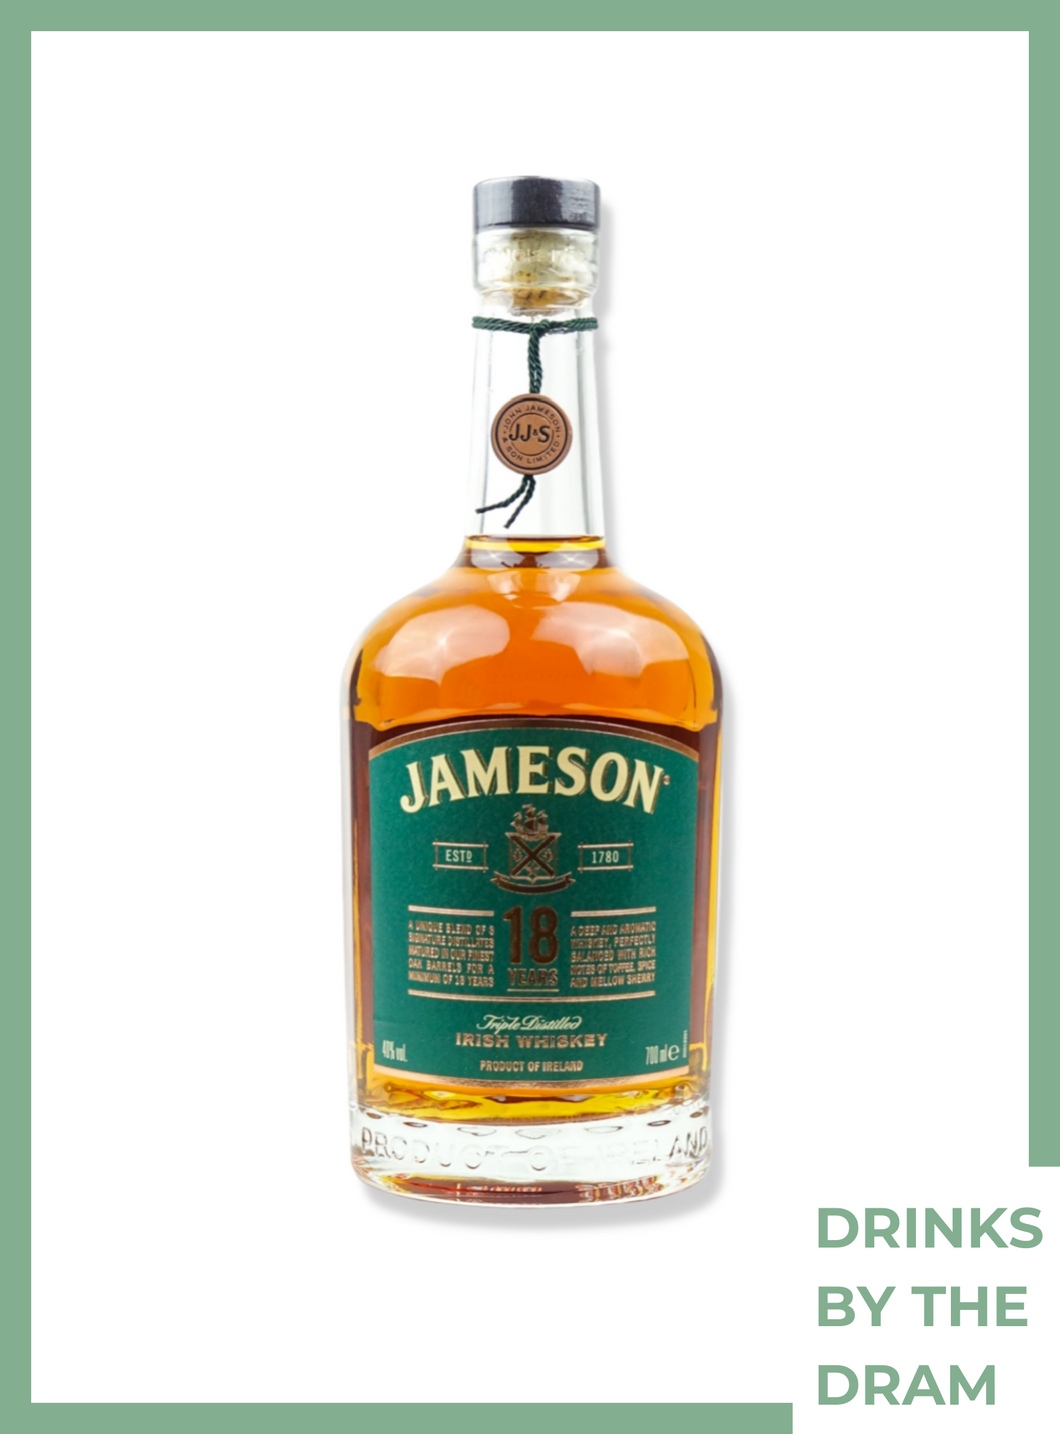 By the Dram (30 ml): Jameson 18 Year Old